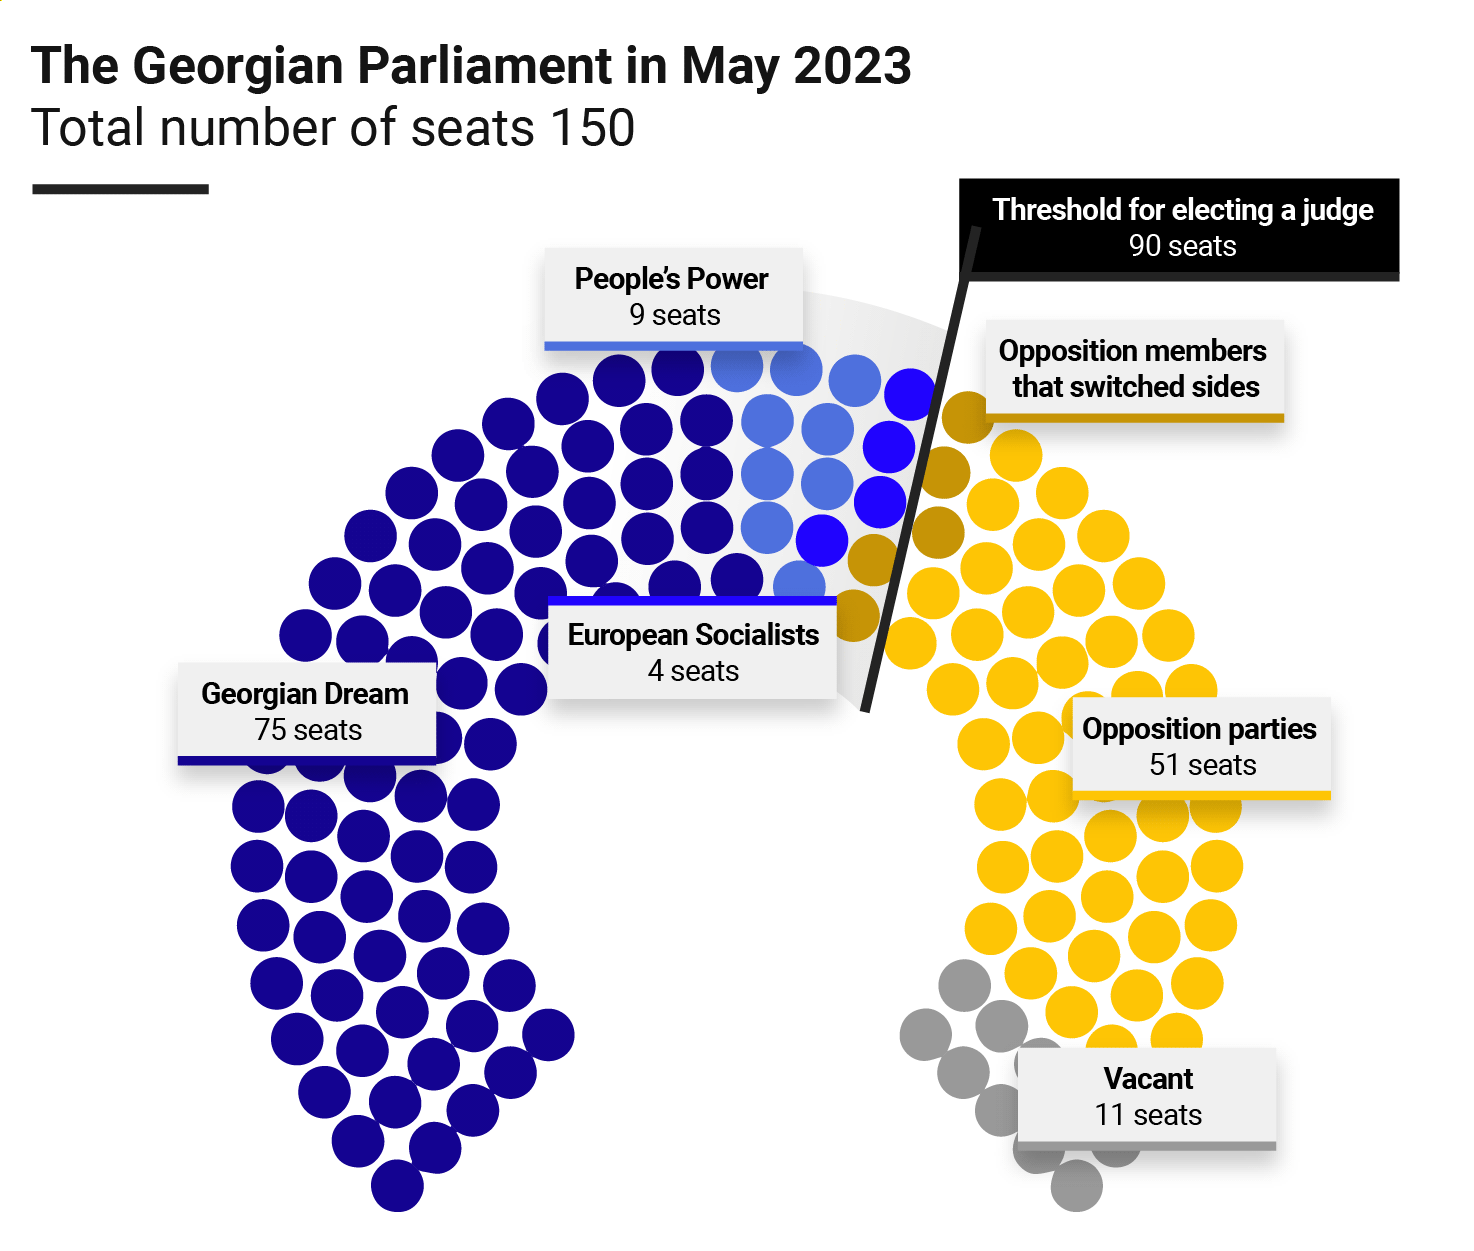 An infographic showing the seats of the Georgian Parliament in May 2023 qhiqqxitzirtinv